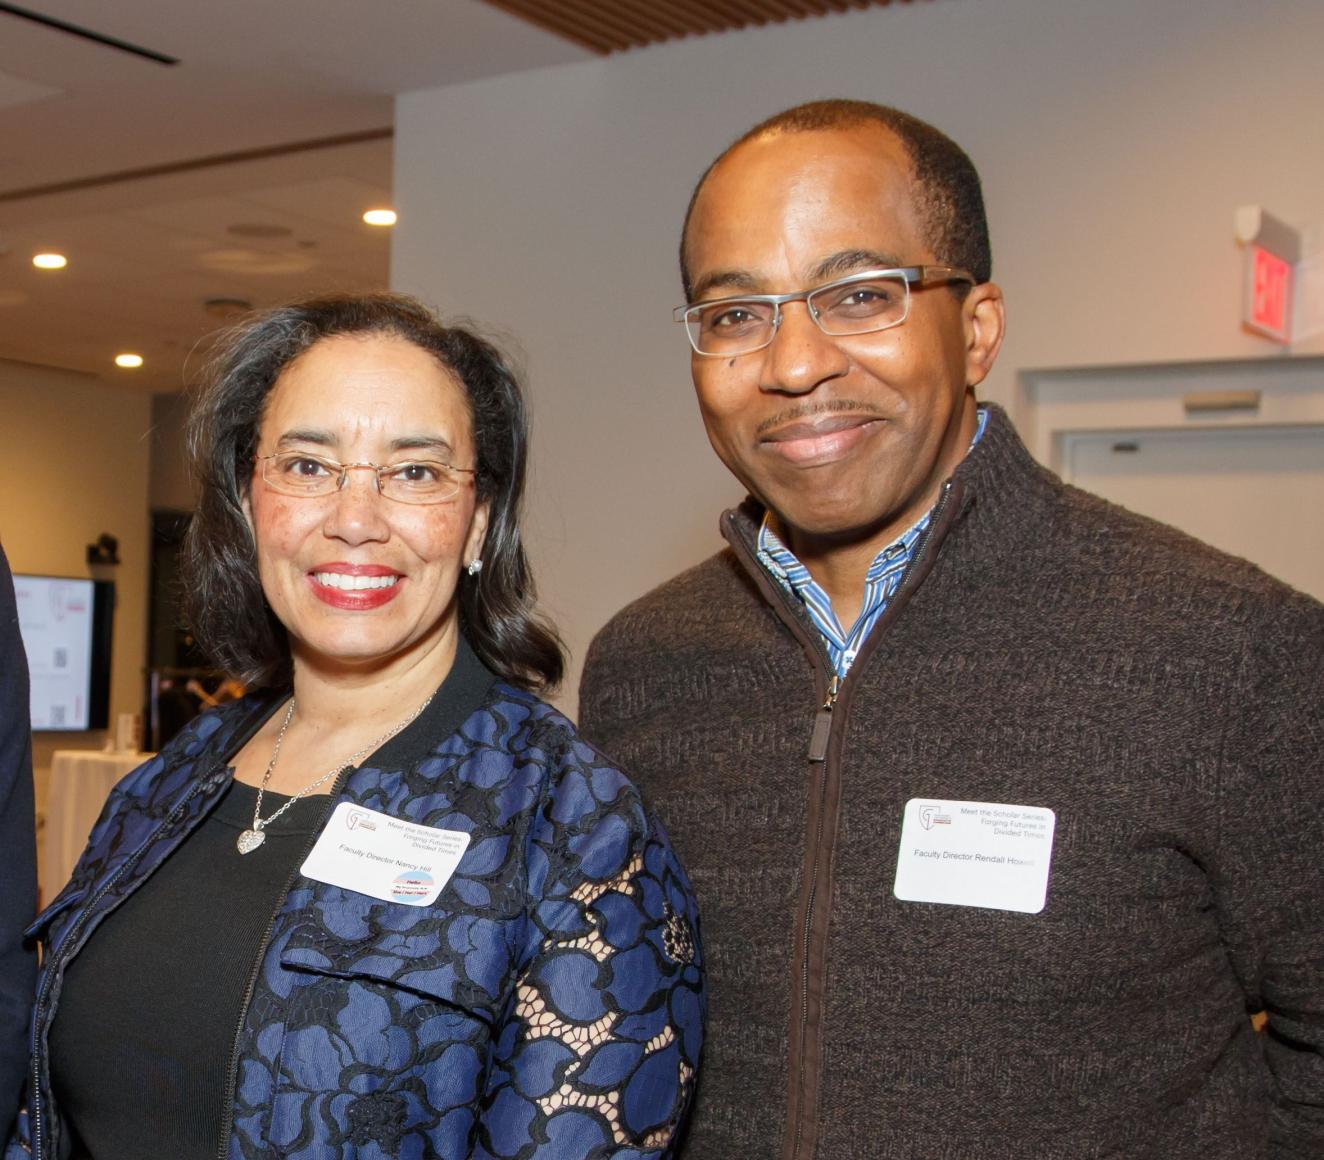 Faculty Directors Professor Nancy Hill & Rendall Howell posing together at an event